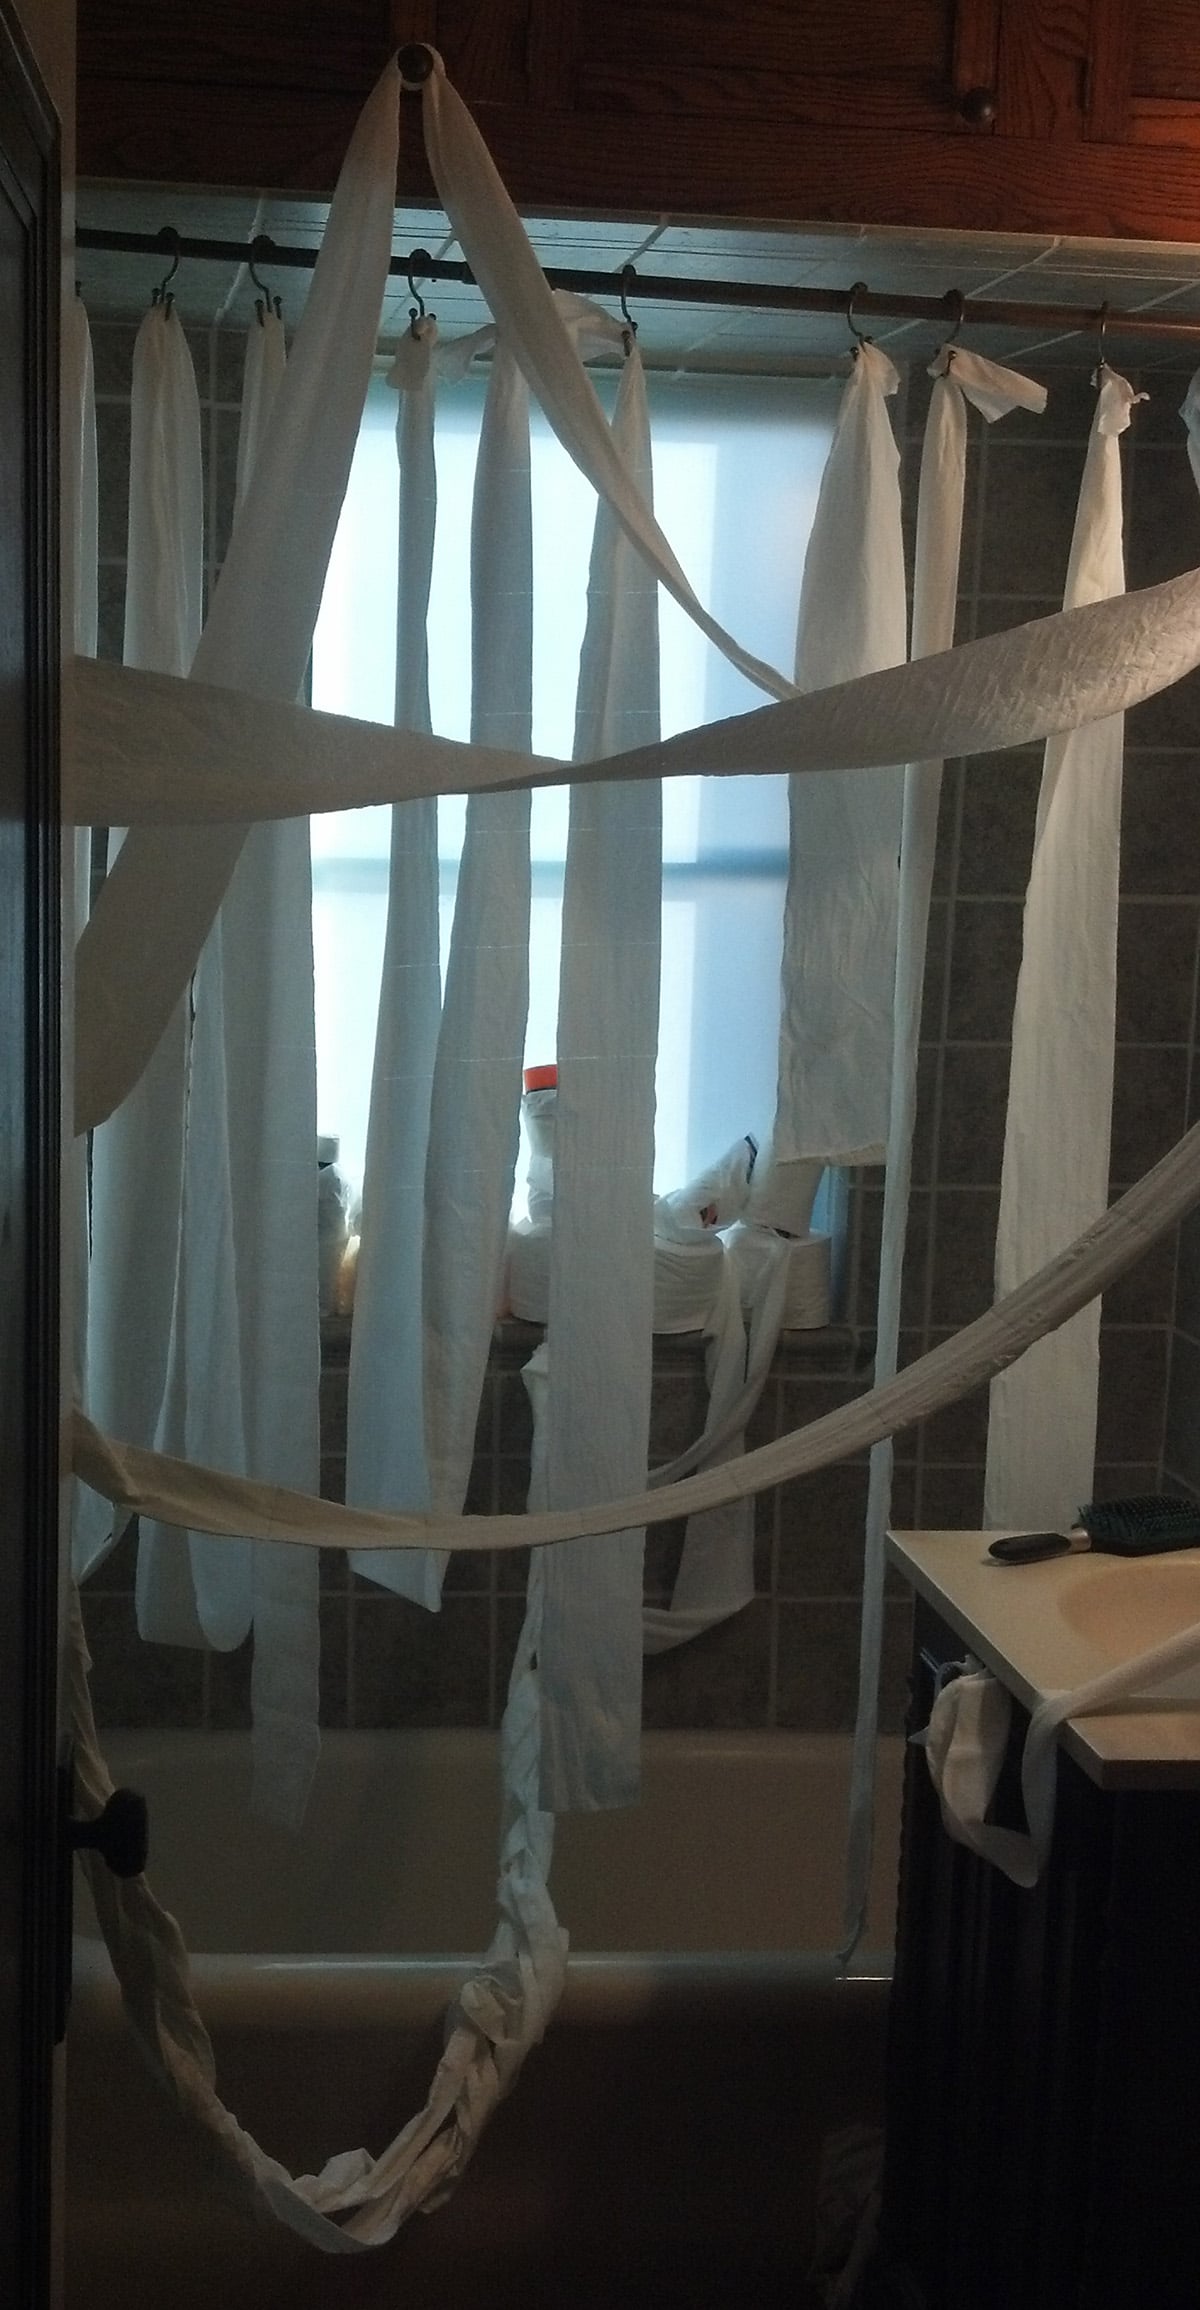 The shower curtain replaced with strands of toilet paper hanging from the hooks.